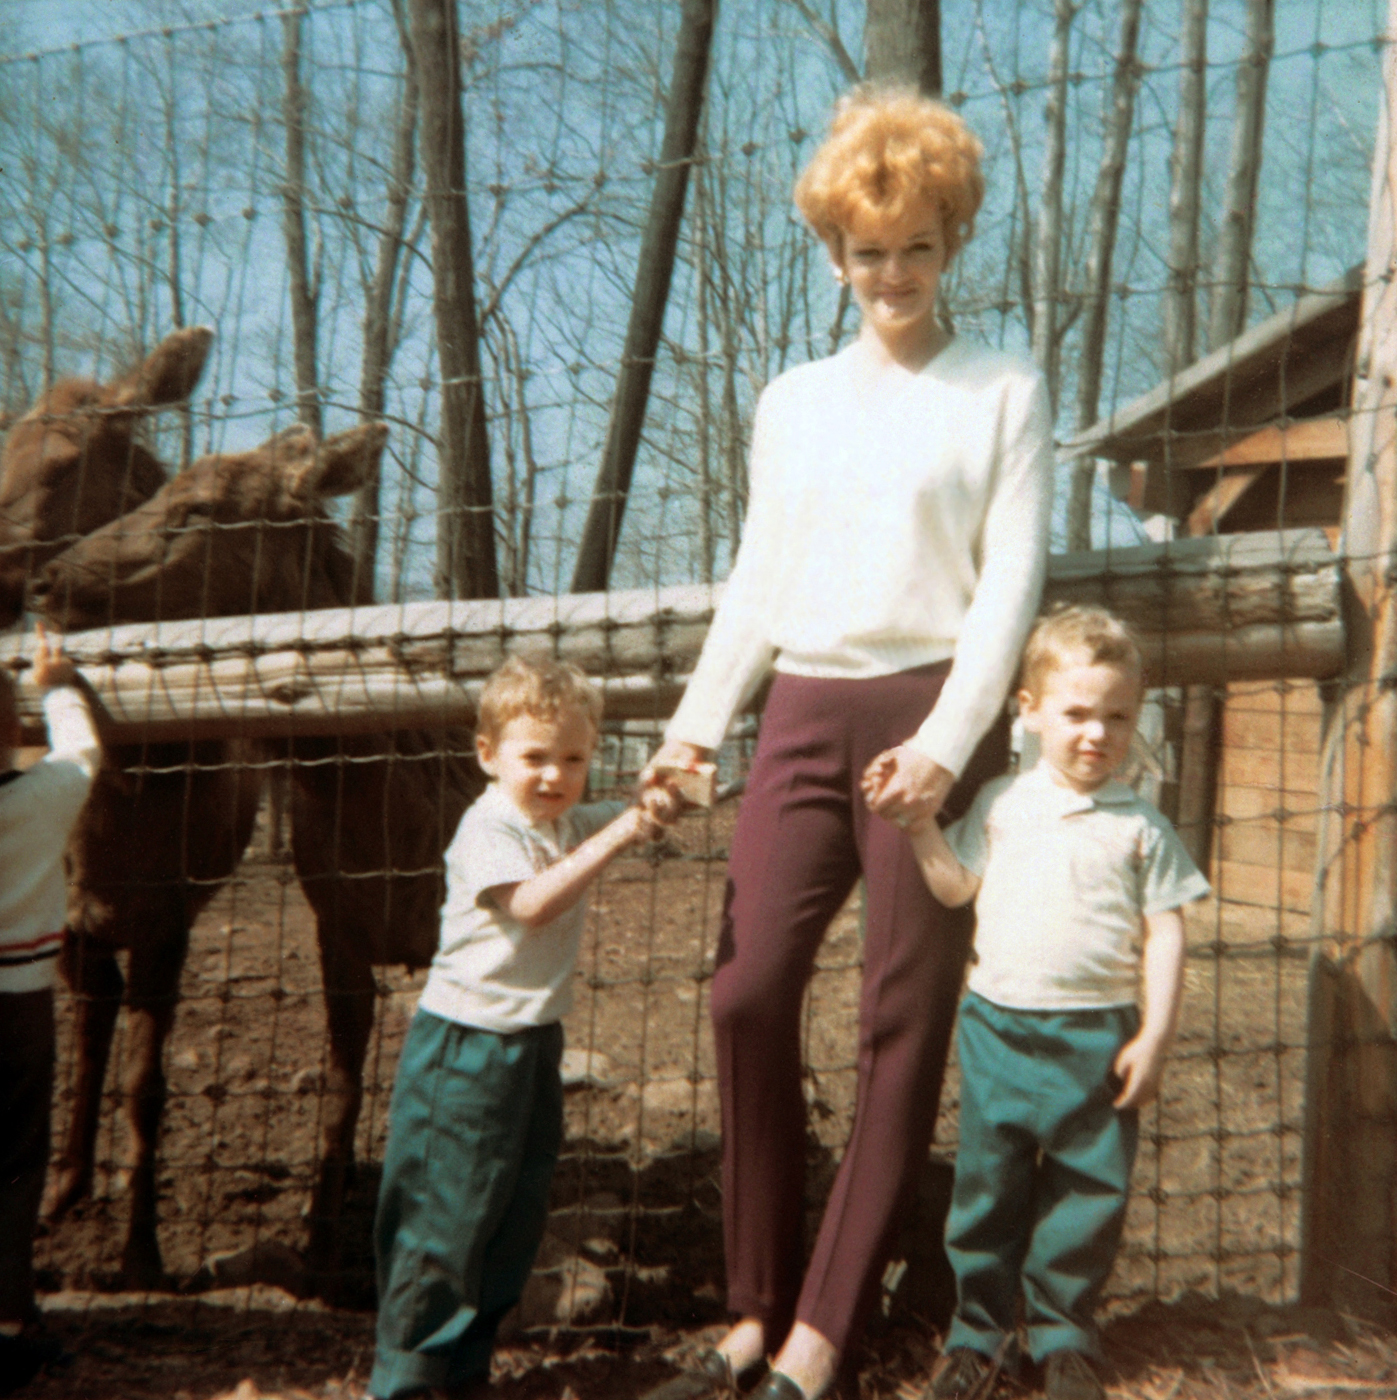 Aug. 1967: Mark (left) and Scott with their MOM CK? at the Turtle Back Zoo in West Orange, N.J.